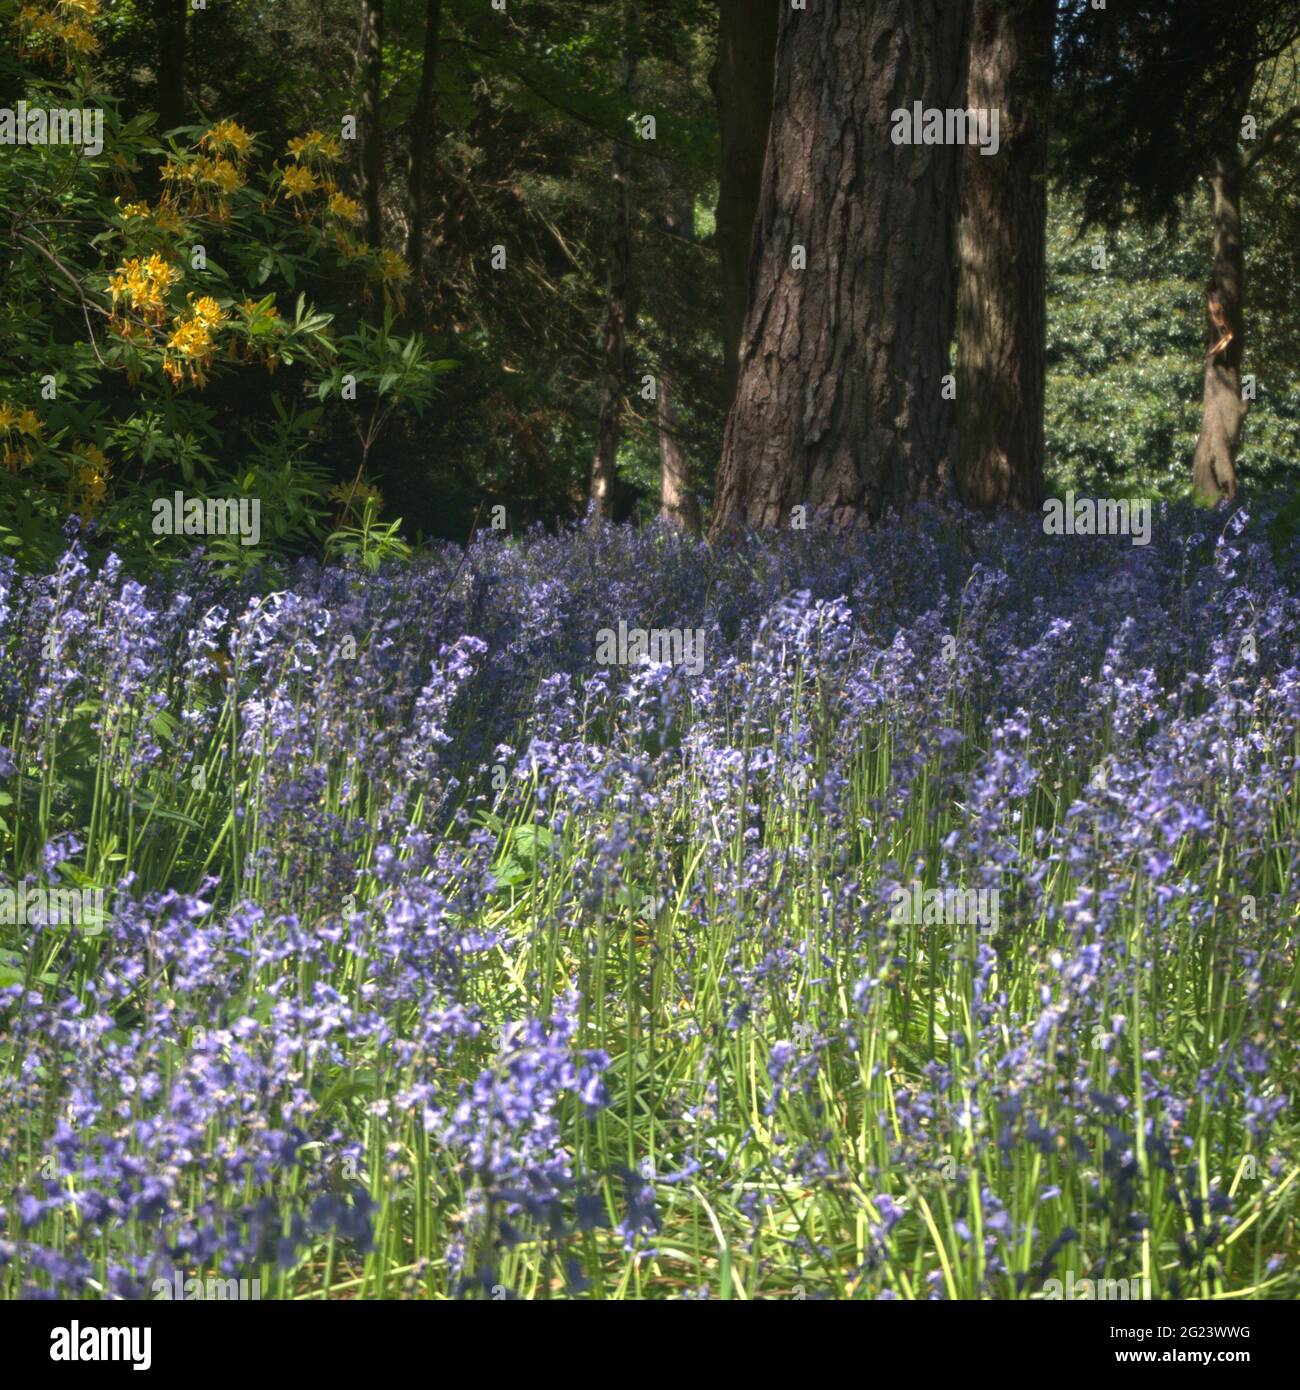 Carpet of Bluebells in Woodland in Capesthorn Hall Grounds Stock Photo